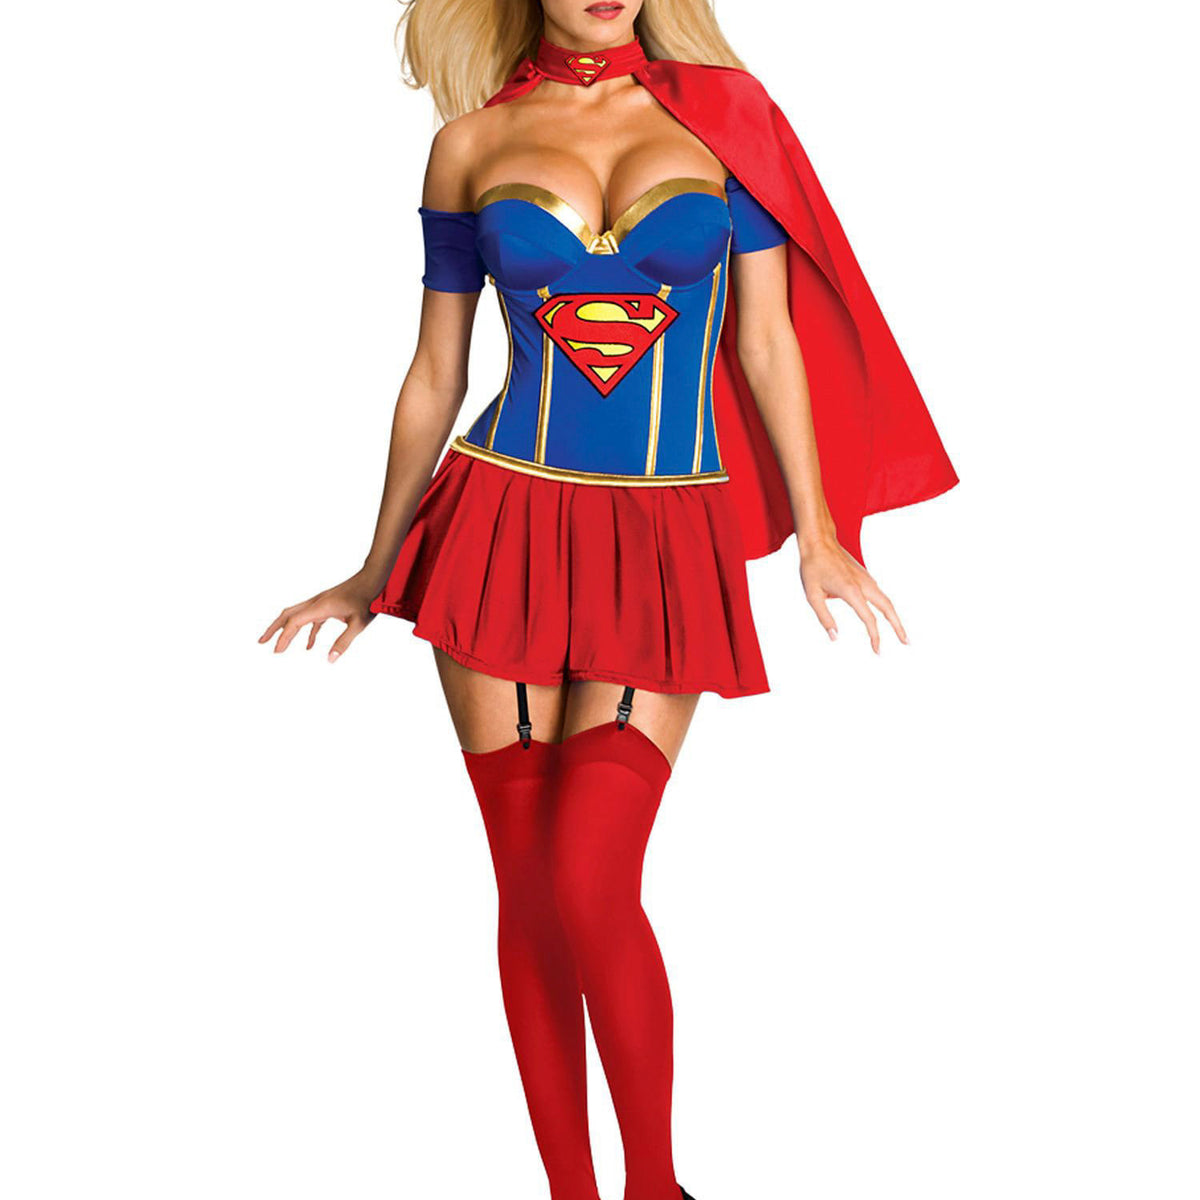 Suit Yourself Superman Supergirl Tights for Adults, One Size up to Women's  Size 6 to 8, Blue and Red with Gold Details